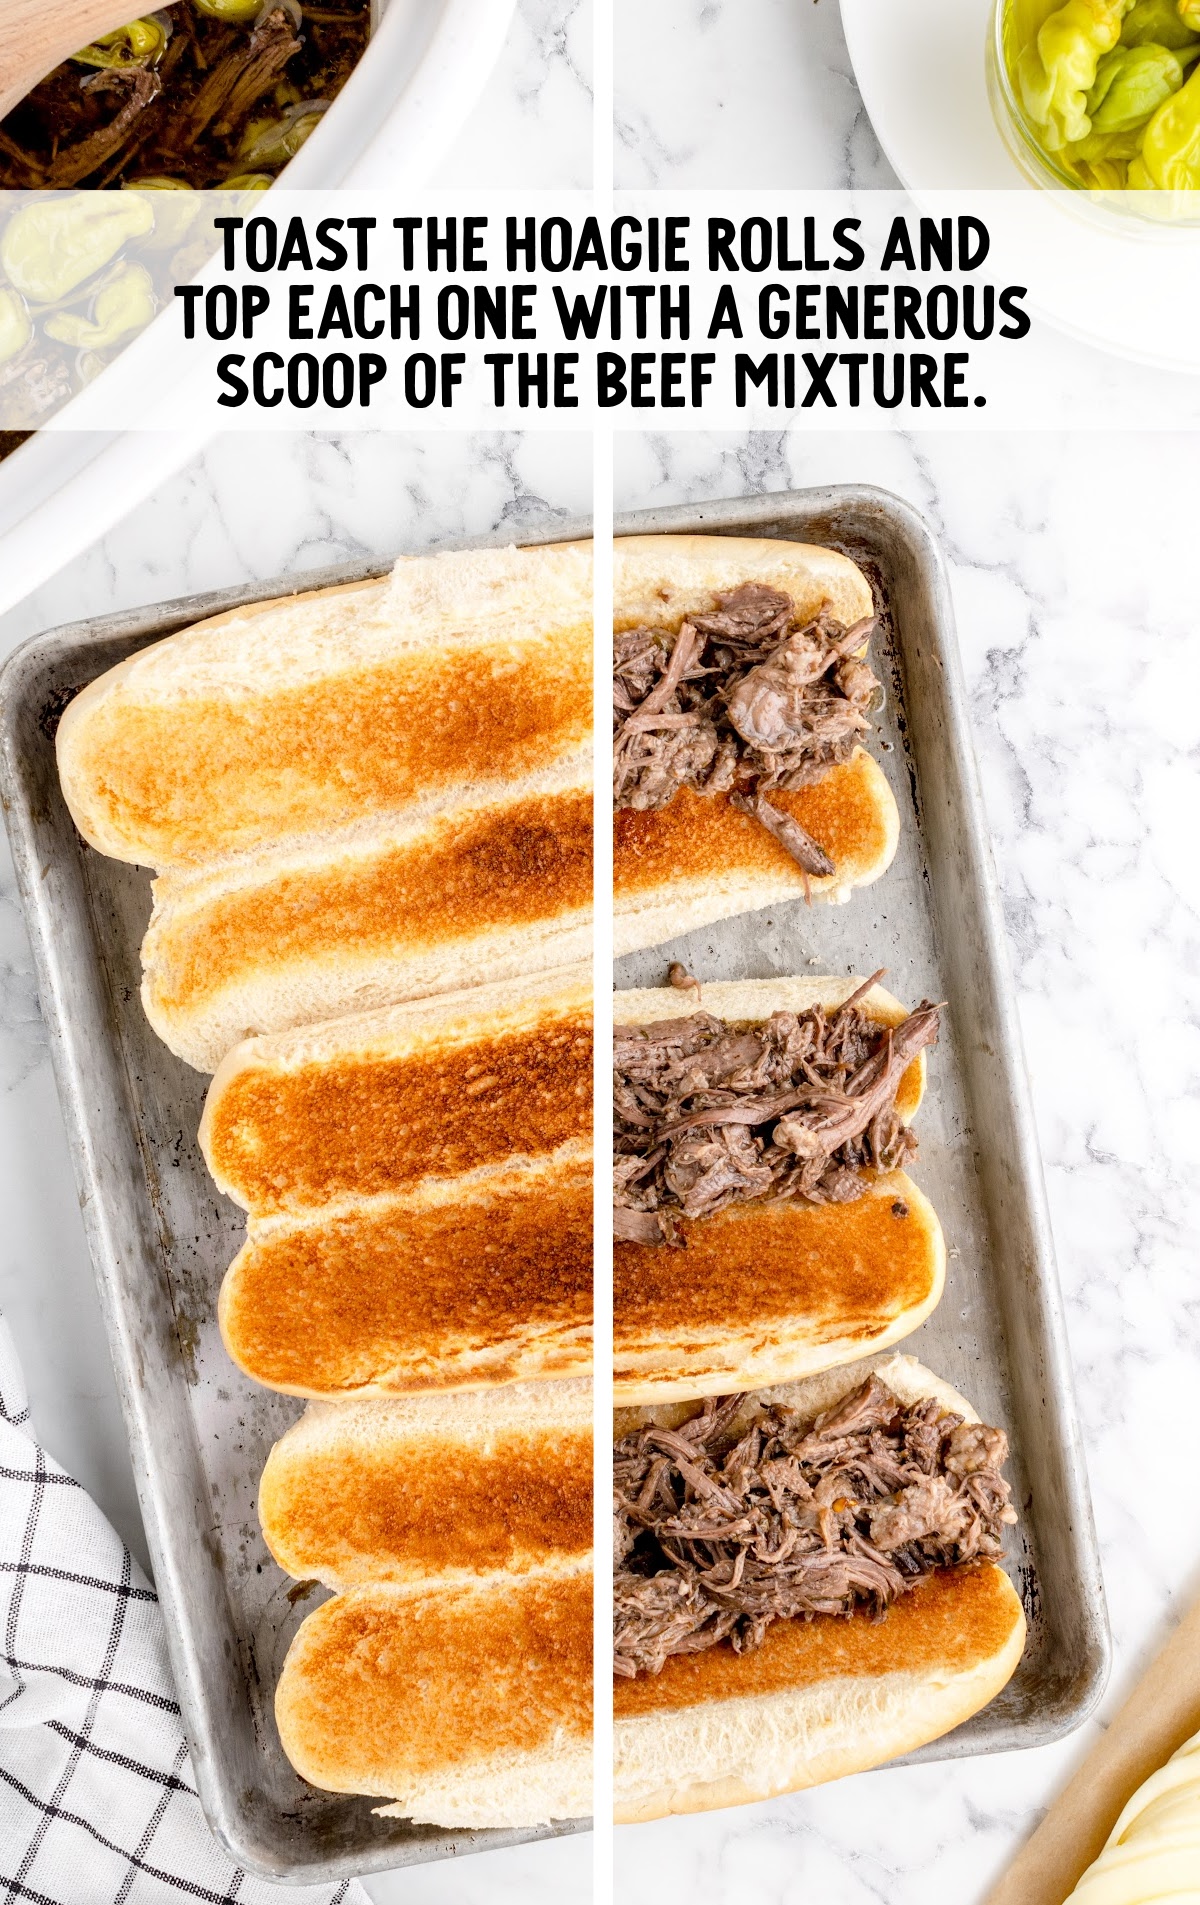 hoagie rolls topped with the shredded beef mixture